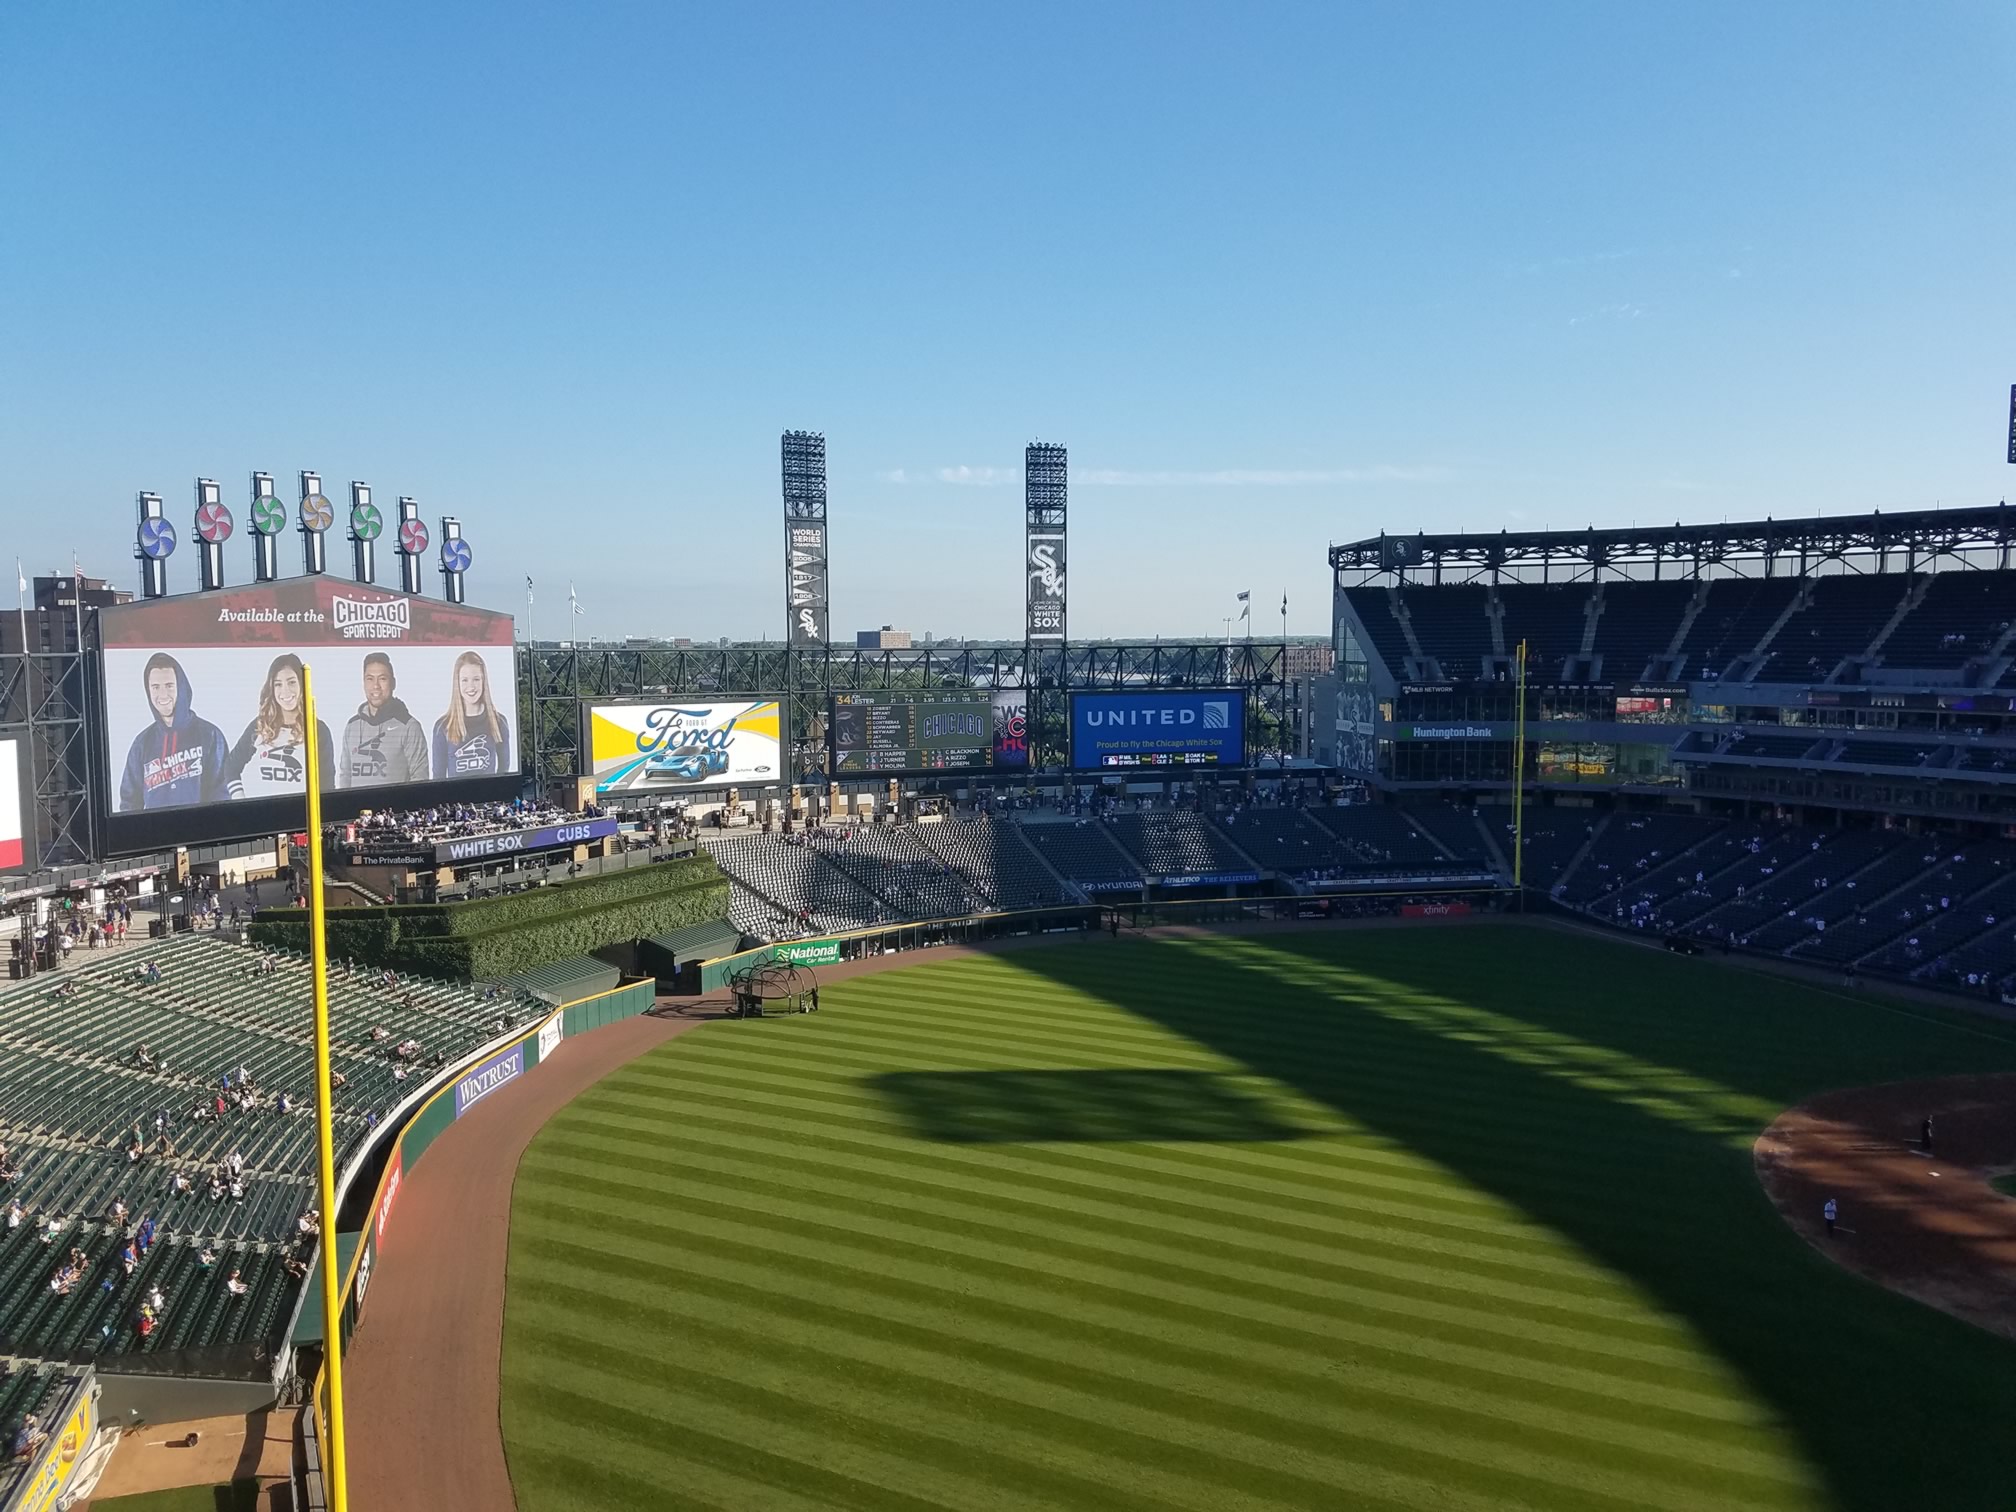 The 300s Reviews: Guaranteed Rate Field, Home of the Chicago White